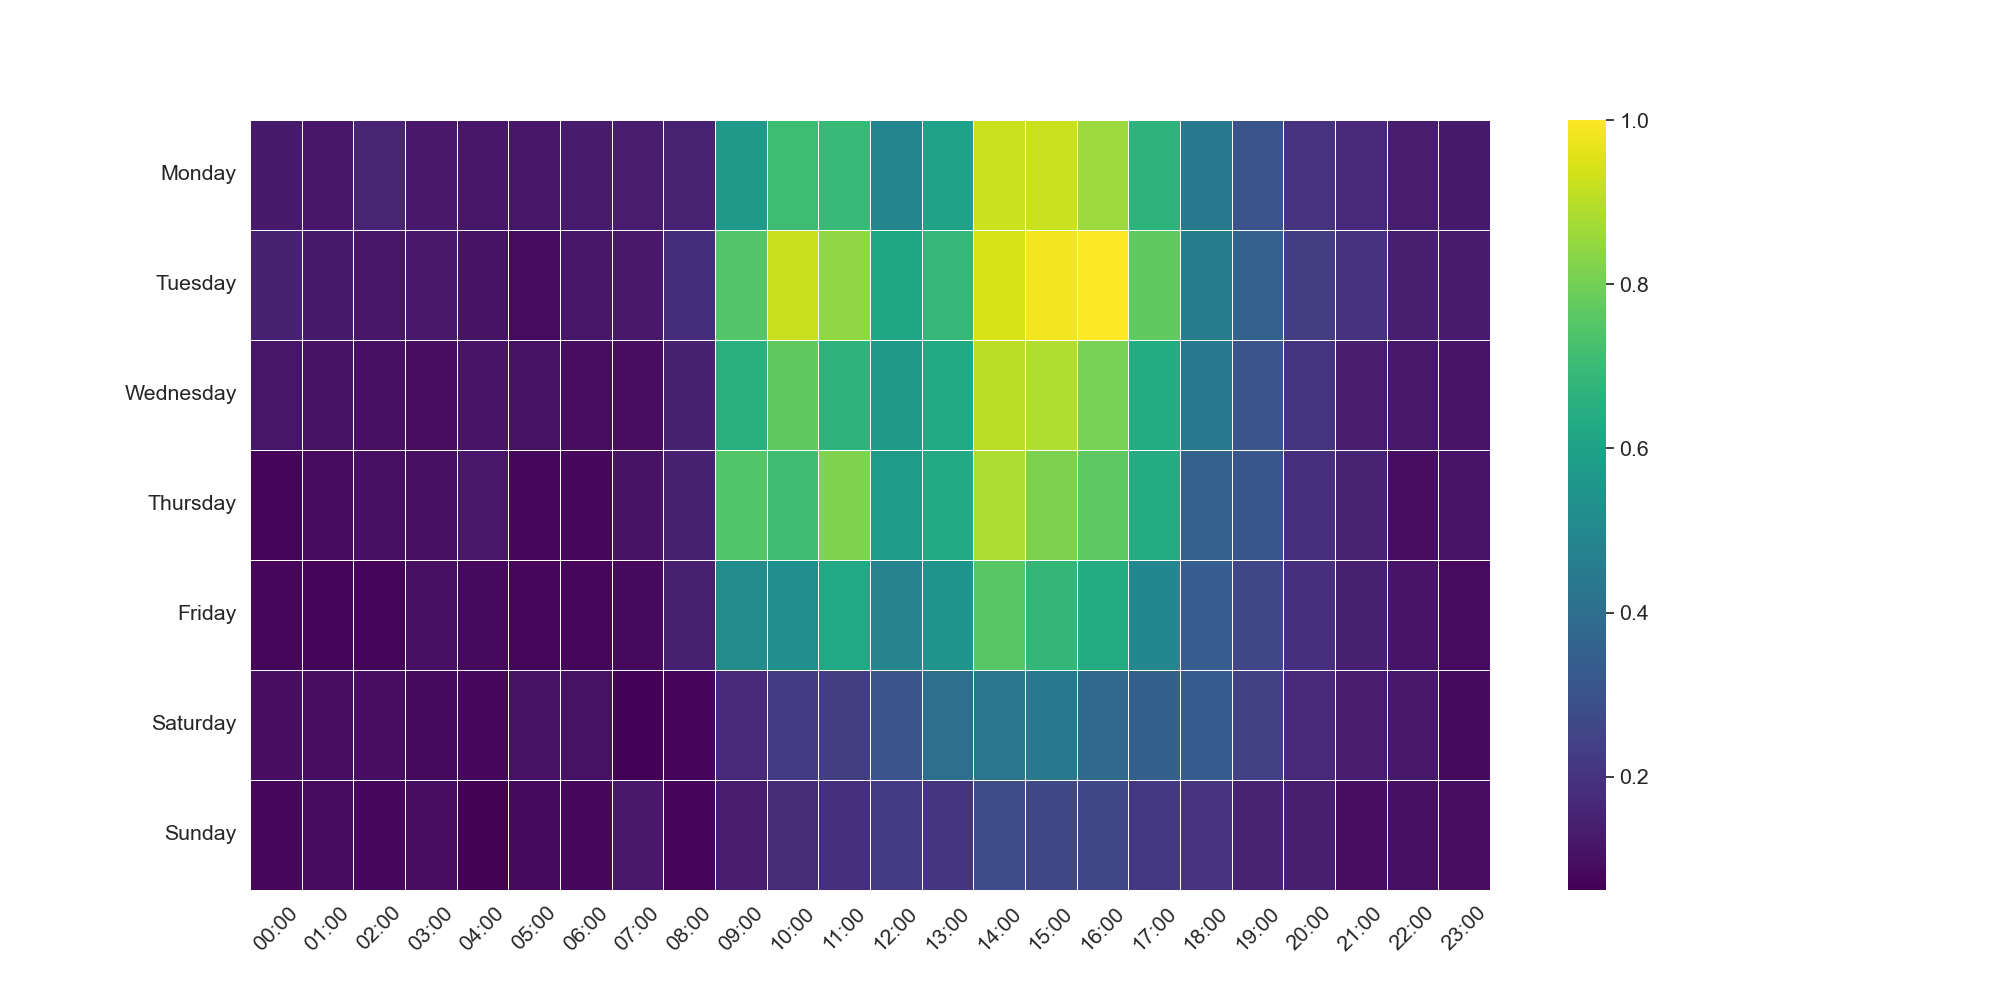 Image 3 is a heat map of the pattern of life adjusted to China Standard Time. The vertical axis lists the days of the week starting with Monday at the top and ending with Sunday. The horizontal axis lists the hours by military time. The heat map is fades from not working dark purple) to green-yellow as the threat actors work between Monday and Friday from 8:00 AM to 17:00 PM. 